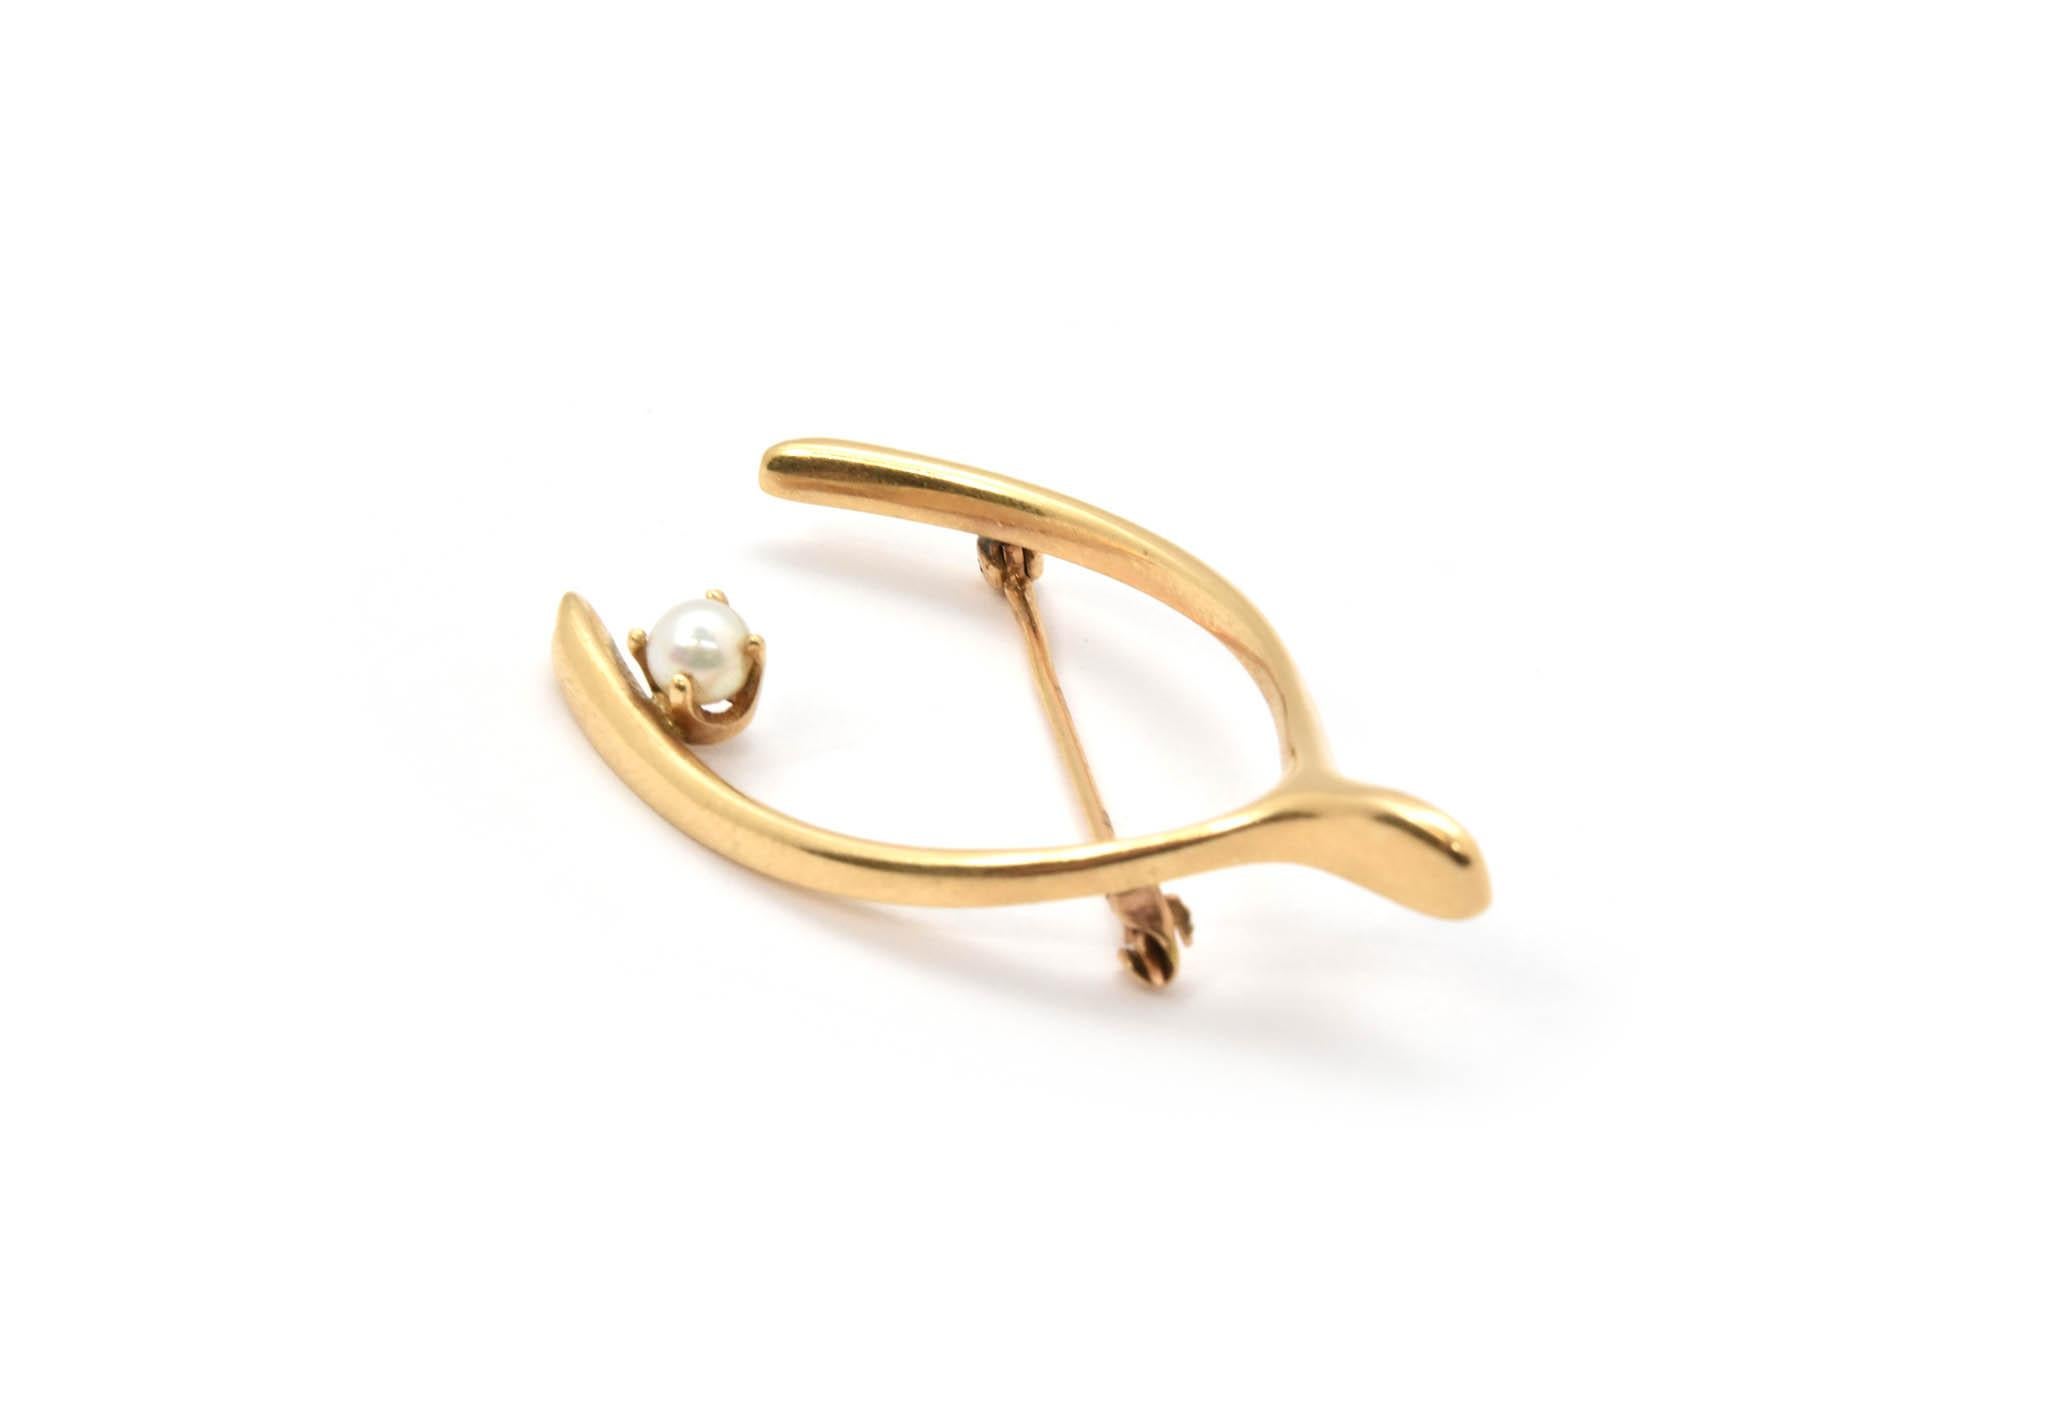 This brooch is made in 14k yellow gold with a single 4mm pearl in the shape of a wishbone. The brooch measures 42x24mm, and it weighs 5.56 grams.